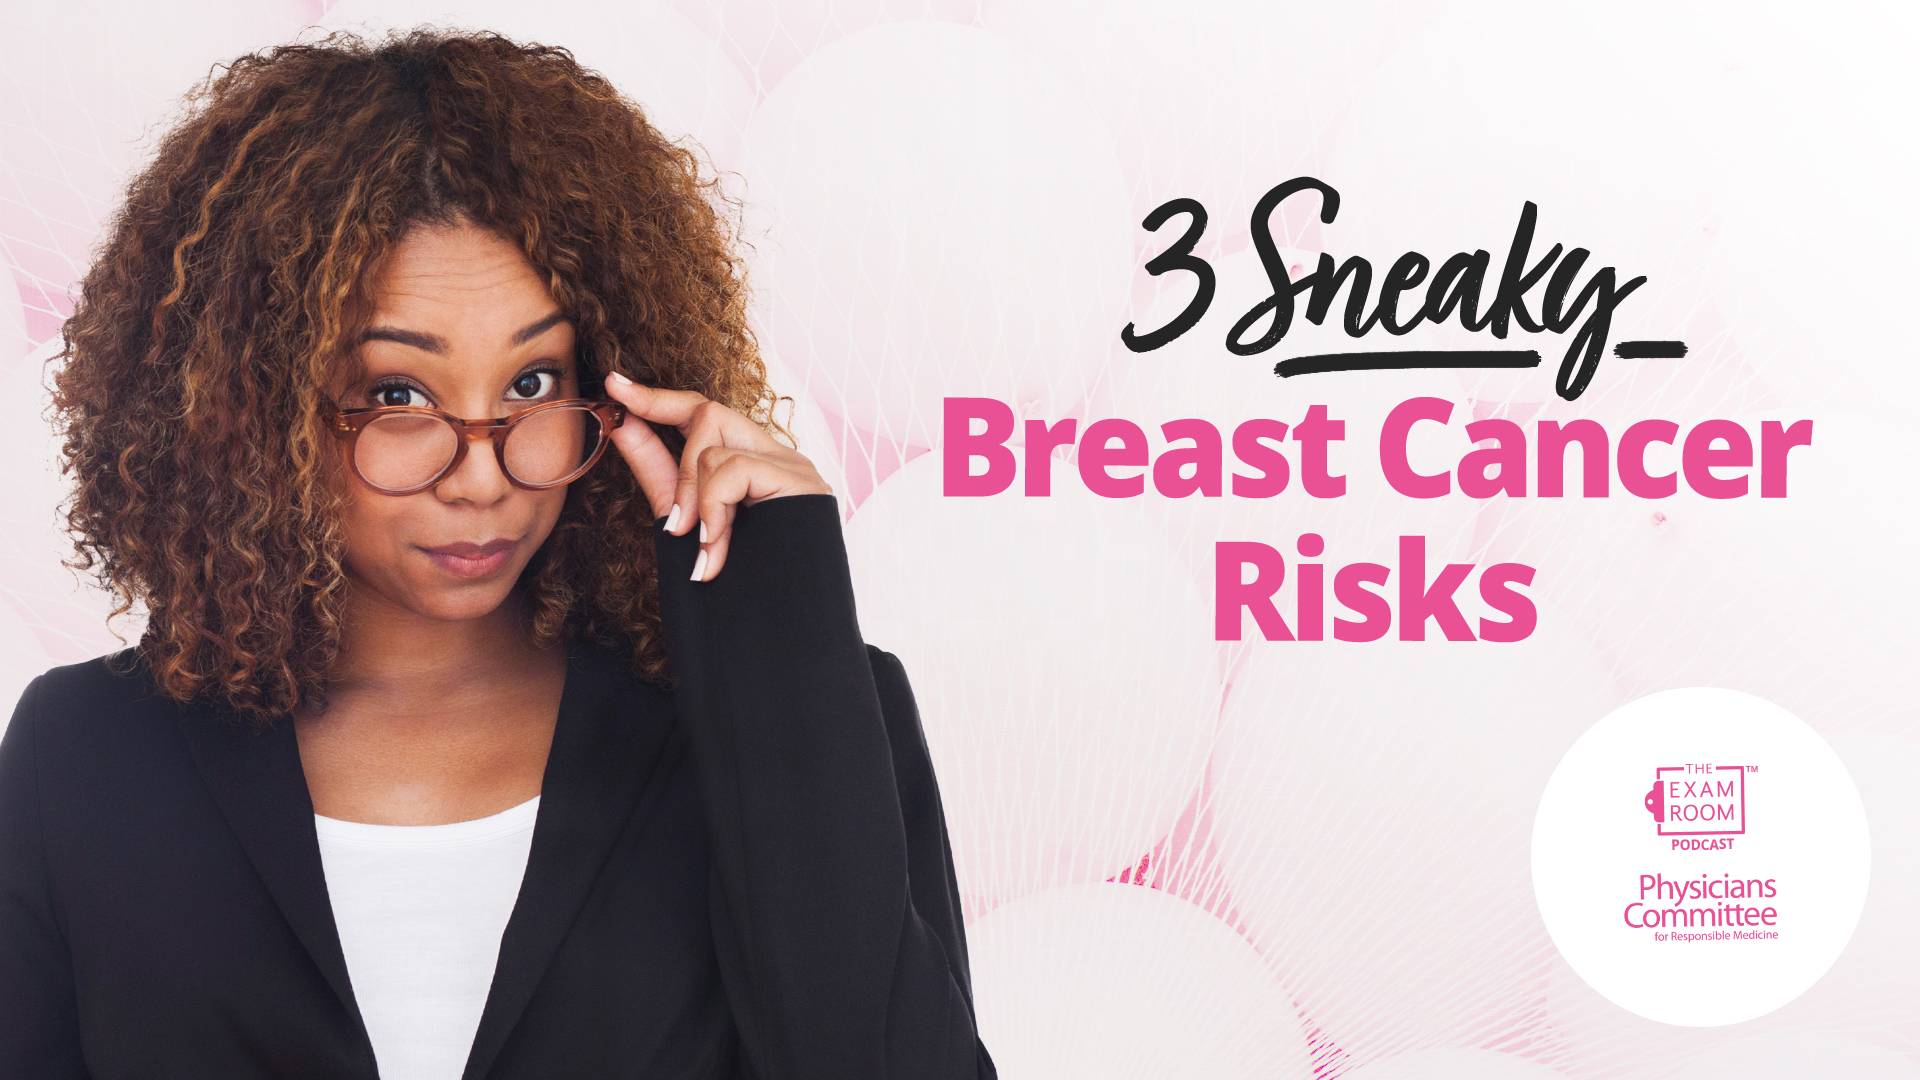 3 Sneaky Risk Factors for Breast Cancer